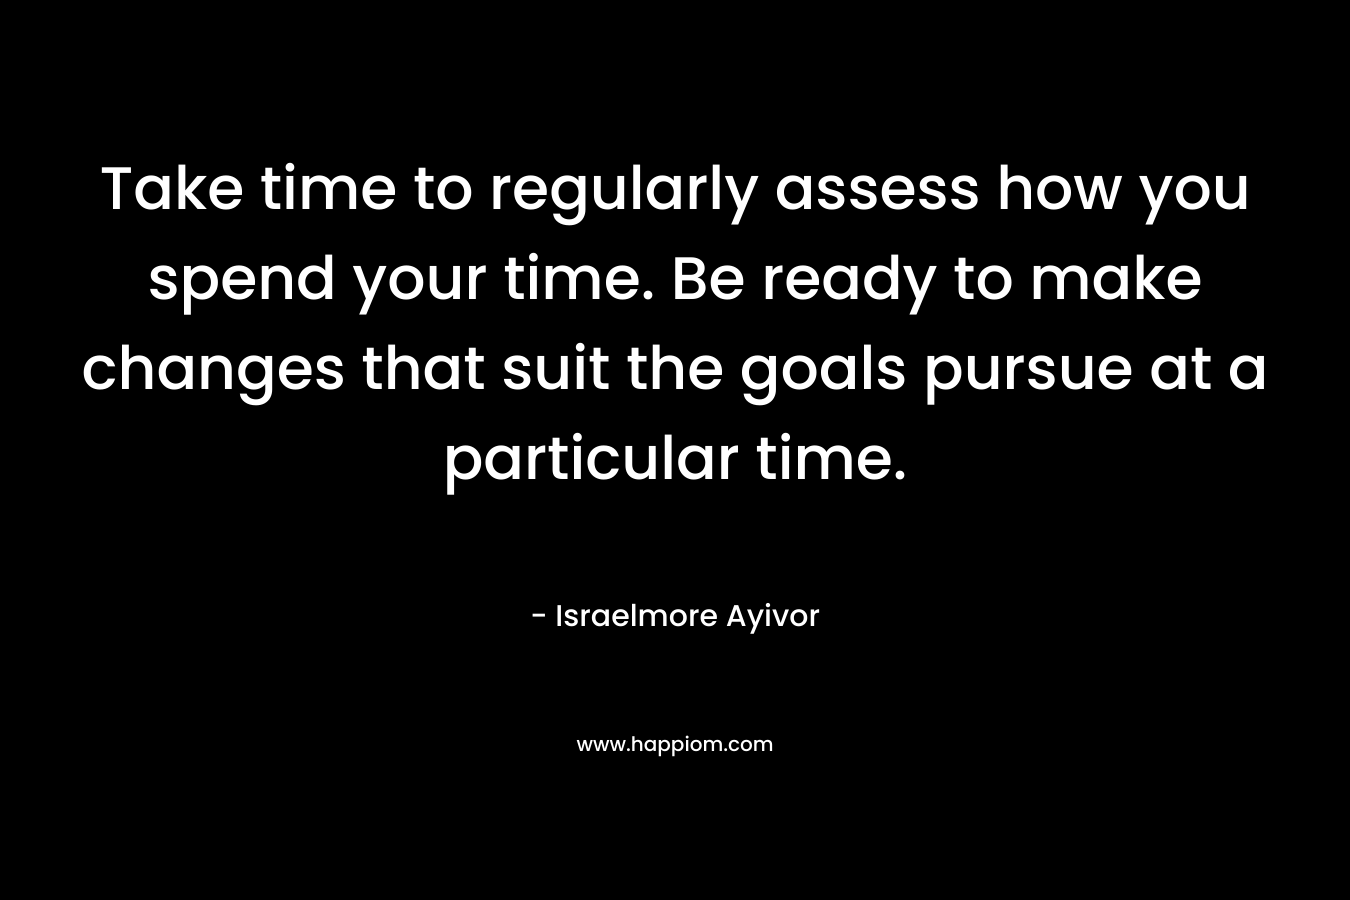 Take time to regularly assess how you spend your time. Be ready to make changes that suit the goals pursue at a particular time.